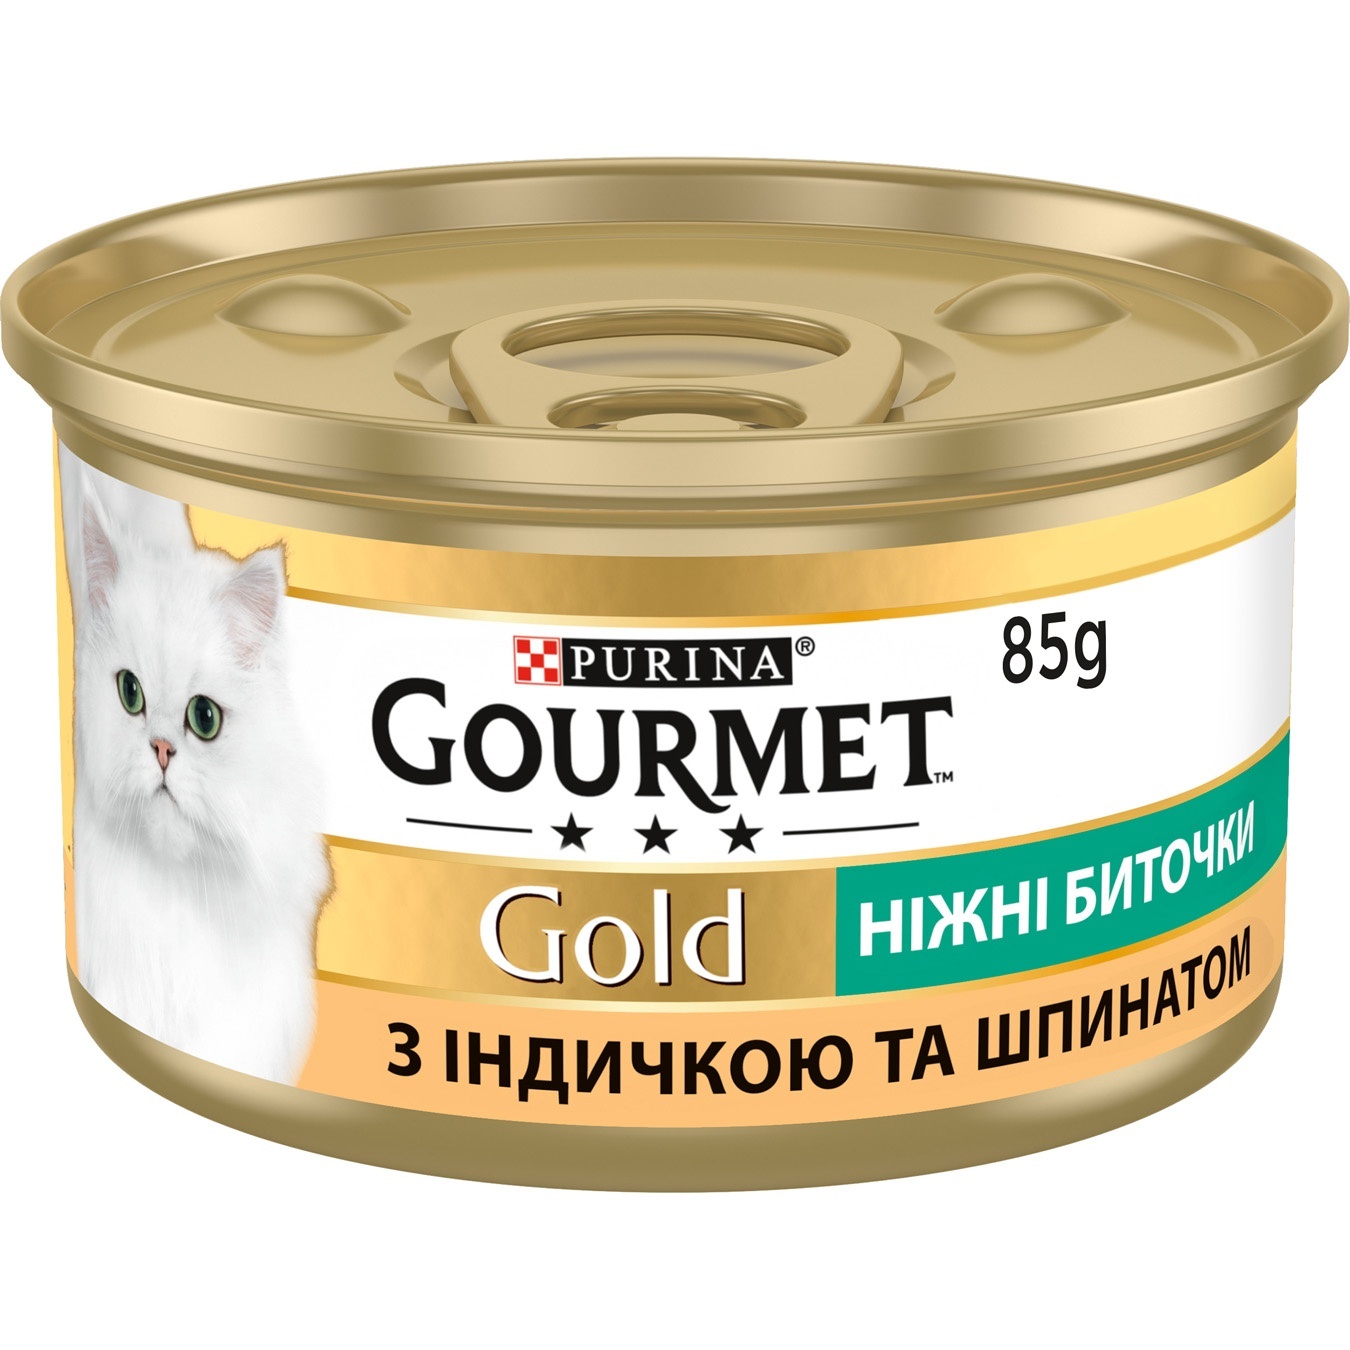 Purina Gourmet for cats canned with turkey and spinach food 85g